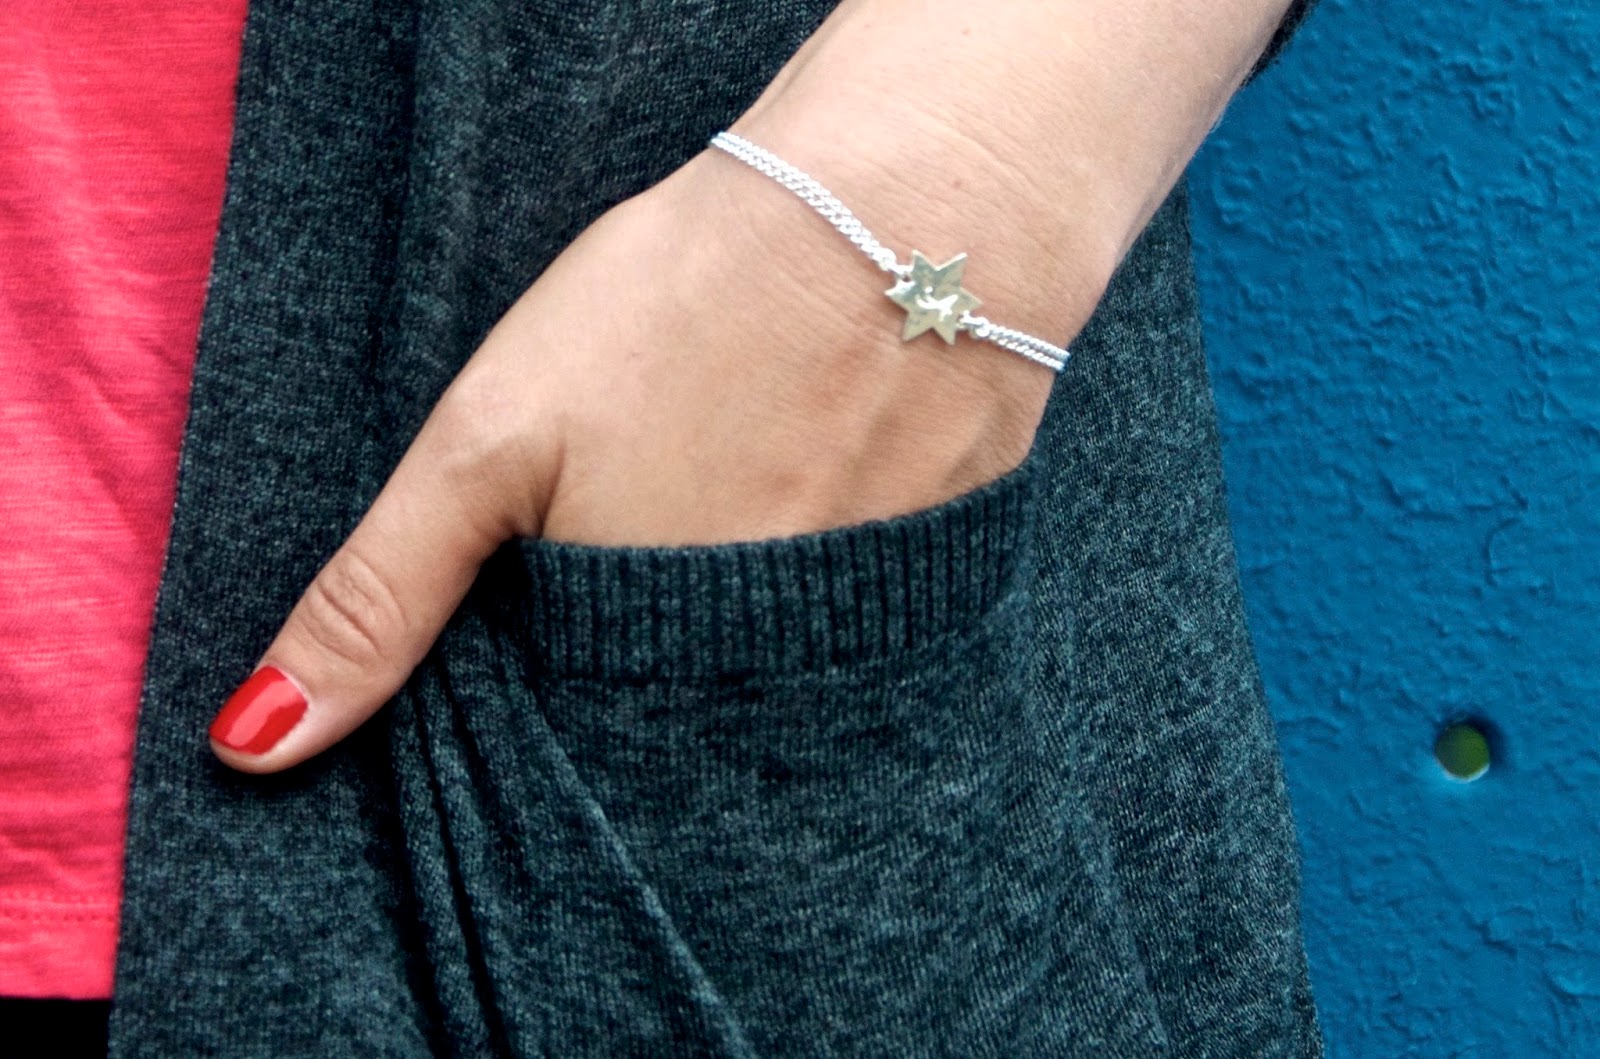 Sterling Silver Engraveable star bracelet, red manicure and gray cardigan